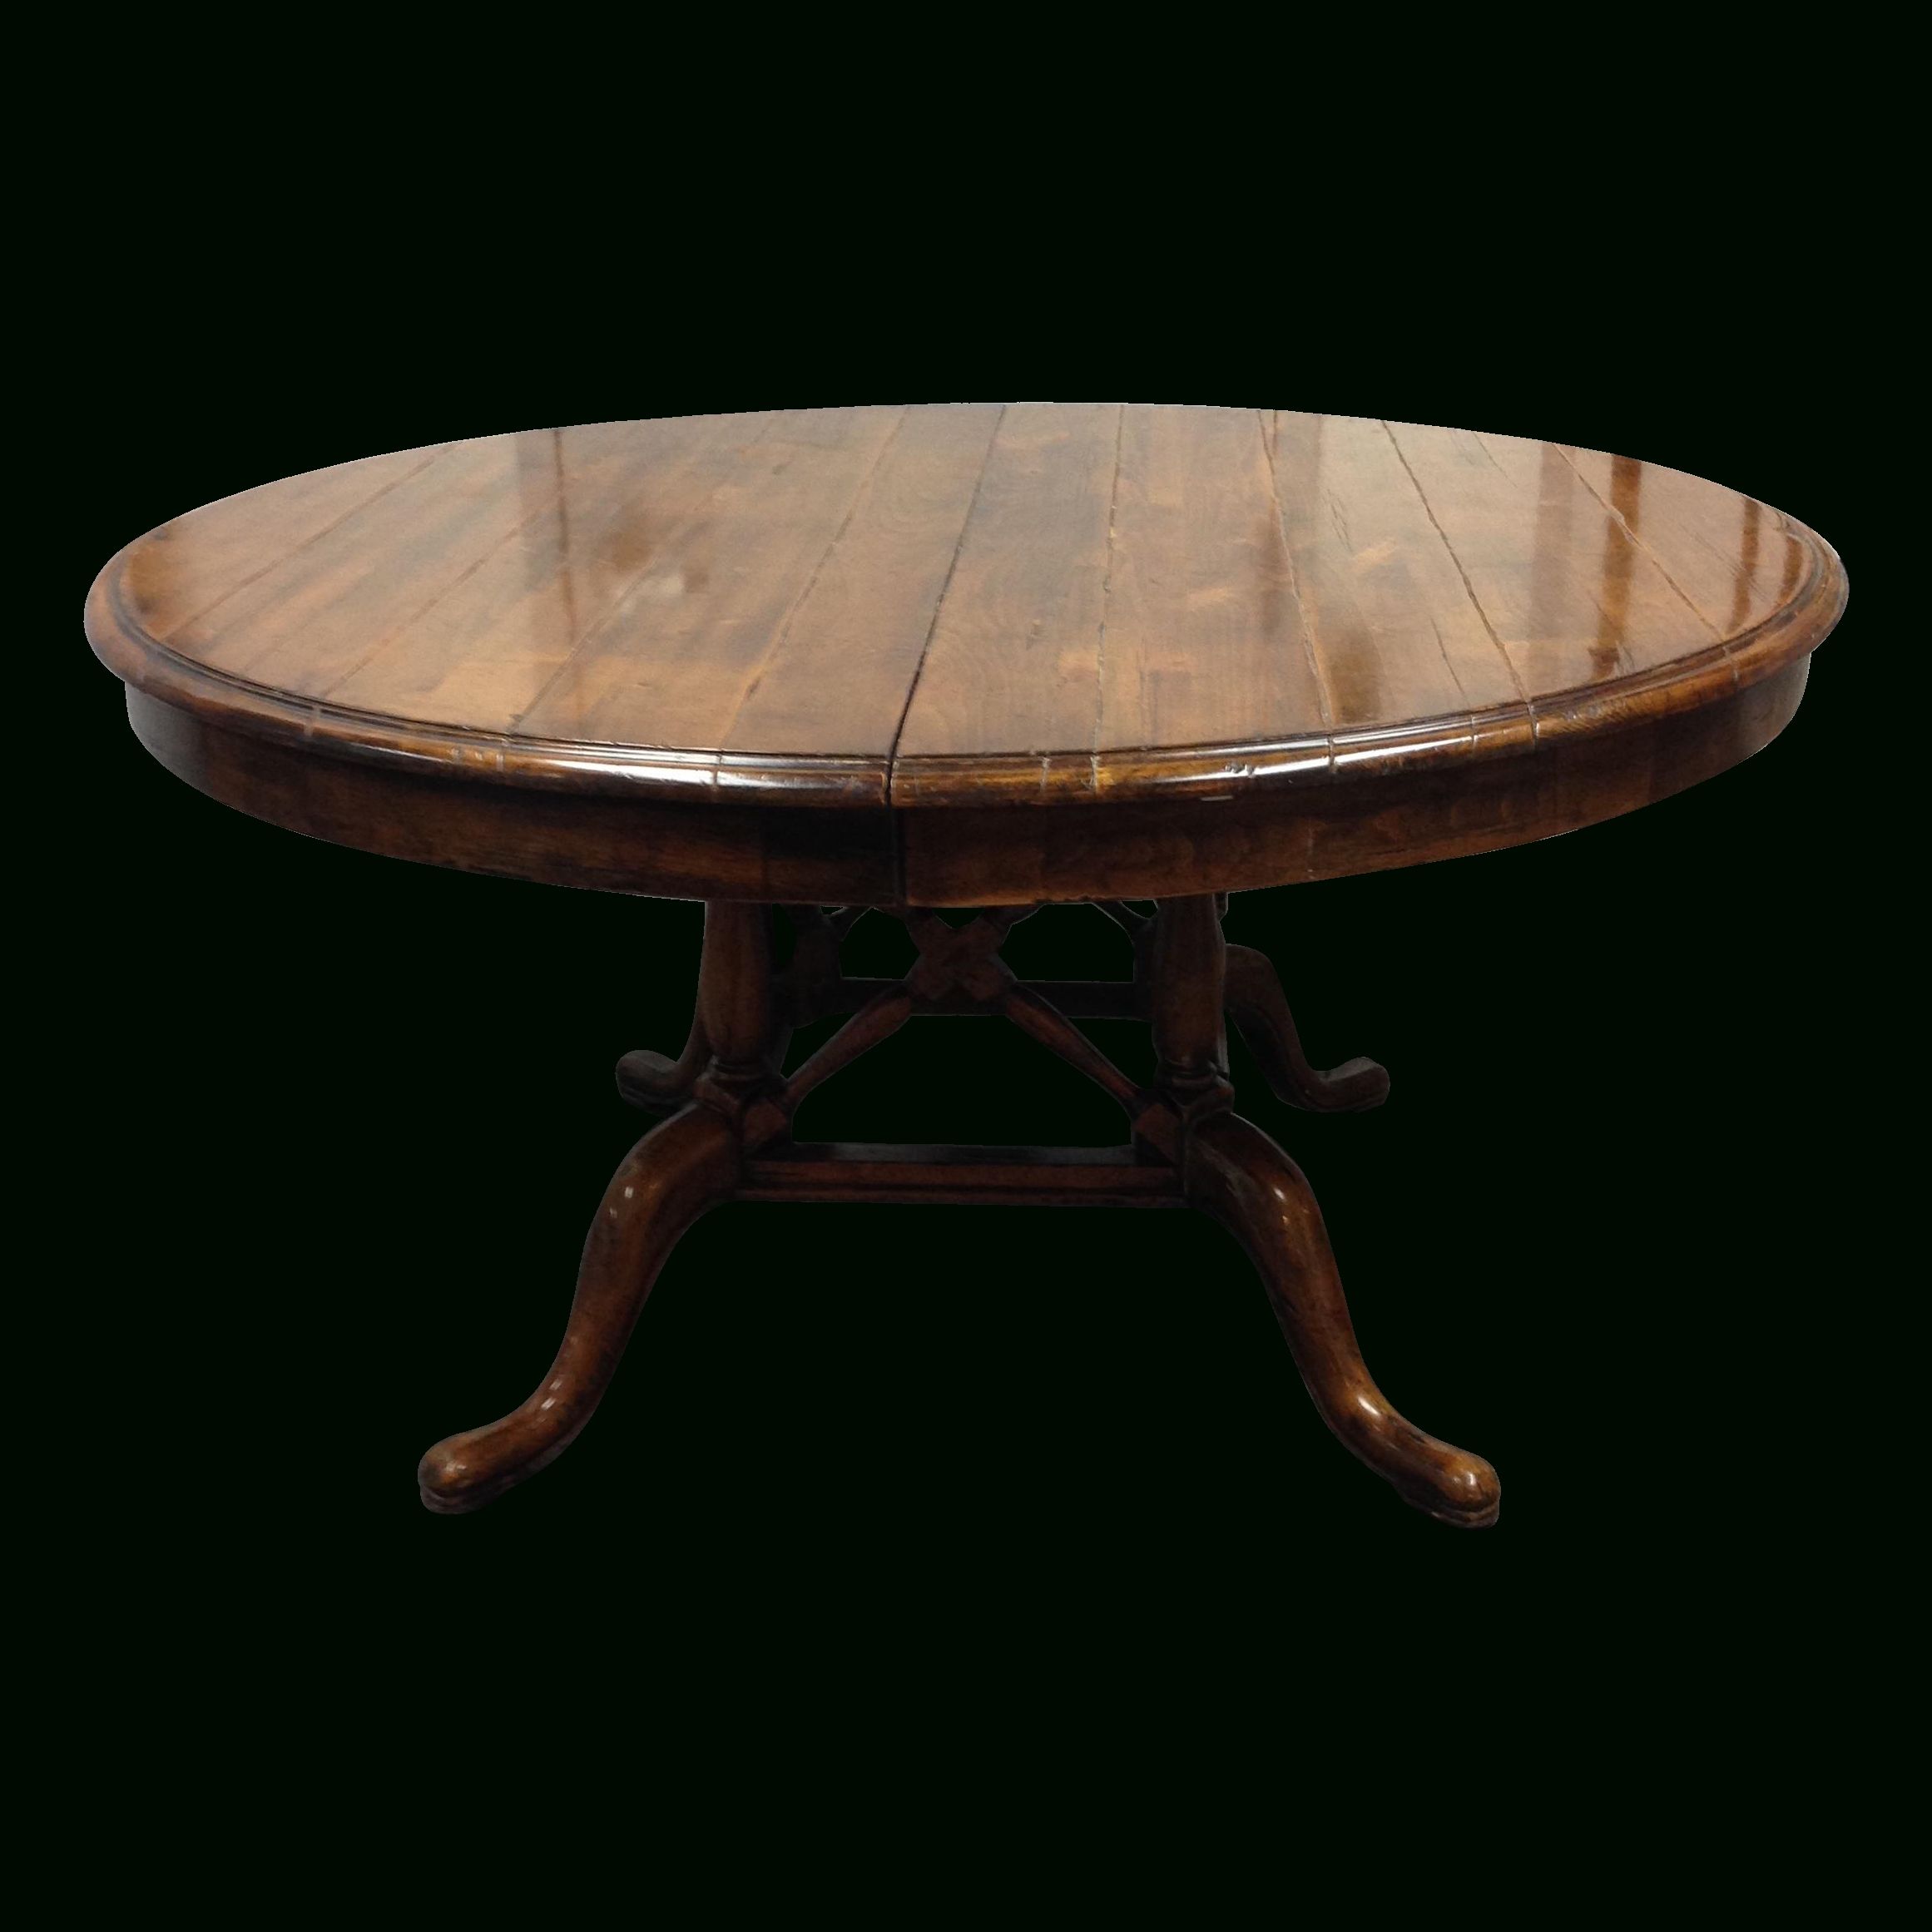 60 Inch Round Dining Table + Leaf | Design Plus Gallery Regarding Leaf Round Console Tables (View 8 of 20)